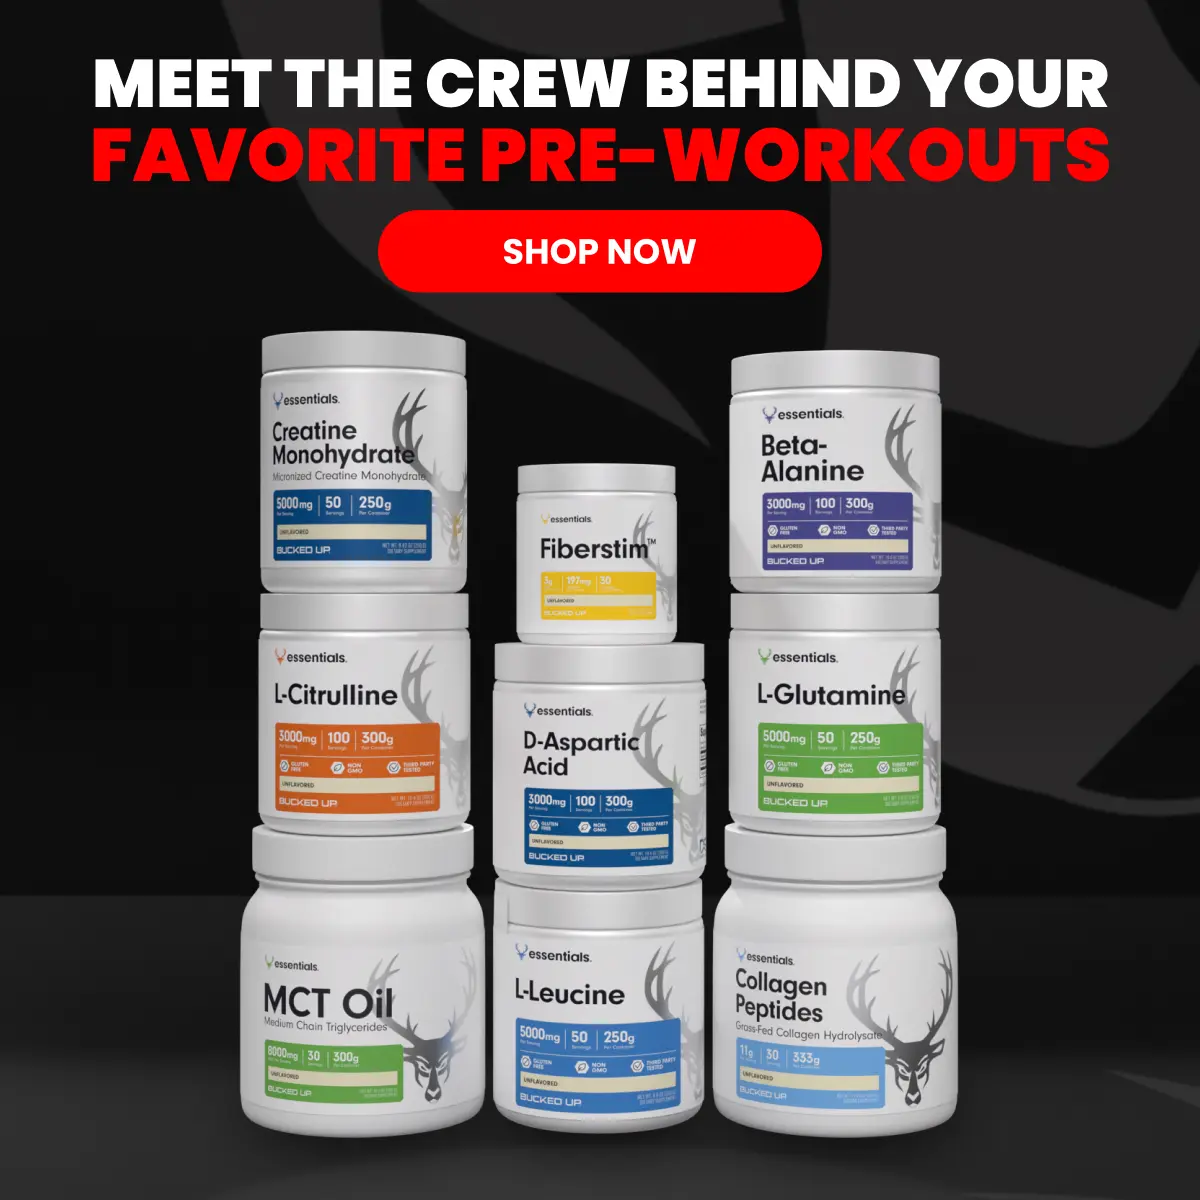 Text says "meet the crew behind your favorite pre-workouts".  Button says "shop now". Image is of product tubs in a line with the following products featured: Fiberstim, MCT Oil, L-Citrulline, Creatine Monohydrate, D-Aspartic Acid, L-L